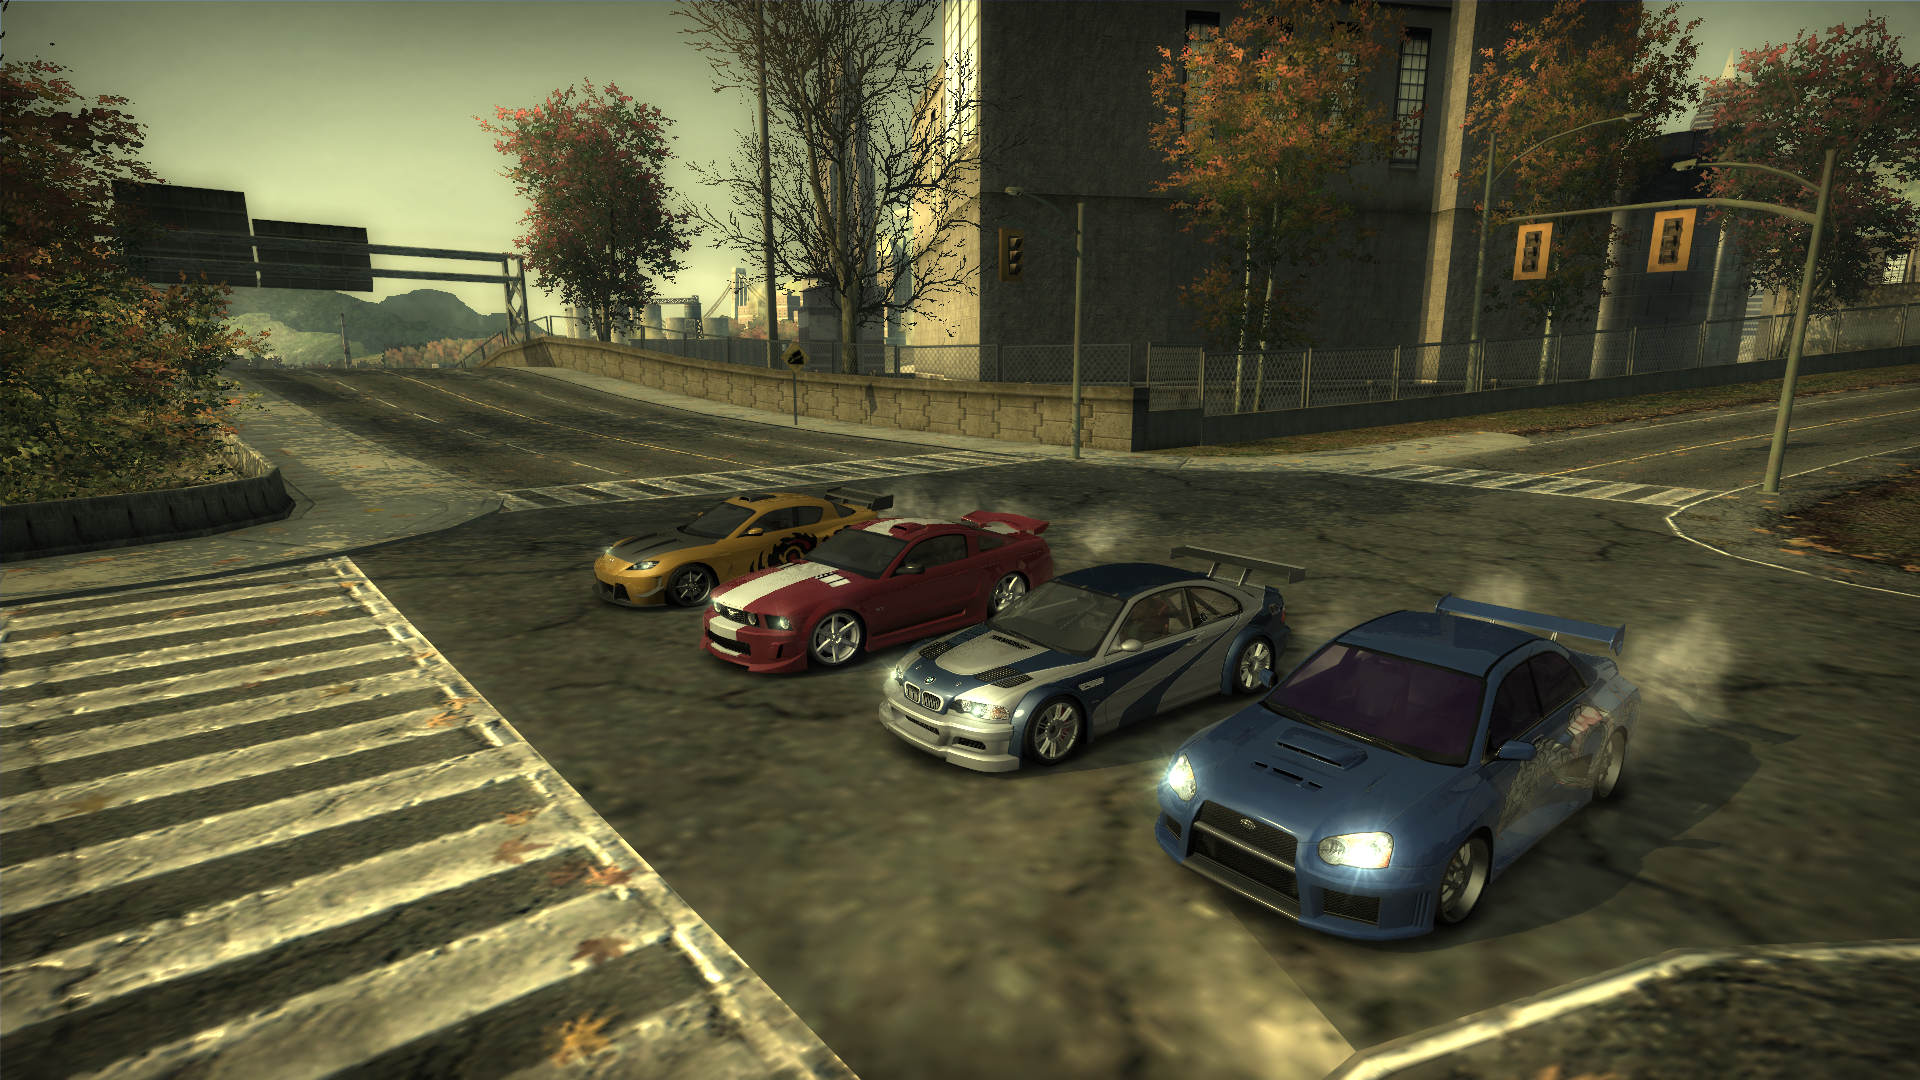 Import mod. NFS most wanted 2005. NFS most wanted 2005 город. NFS MW 2005. Нфс МВ 2021.